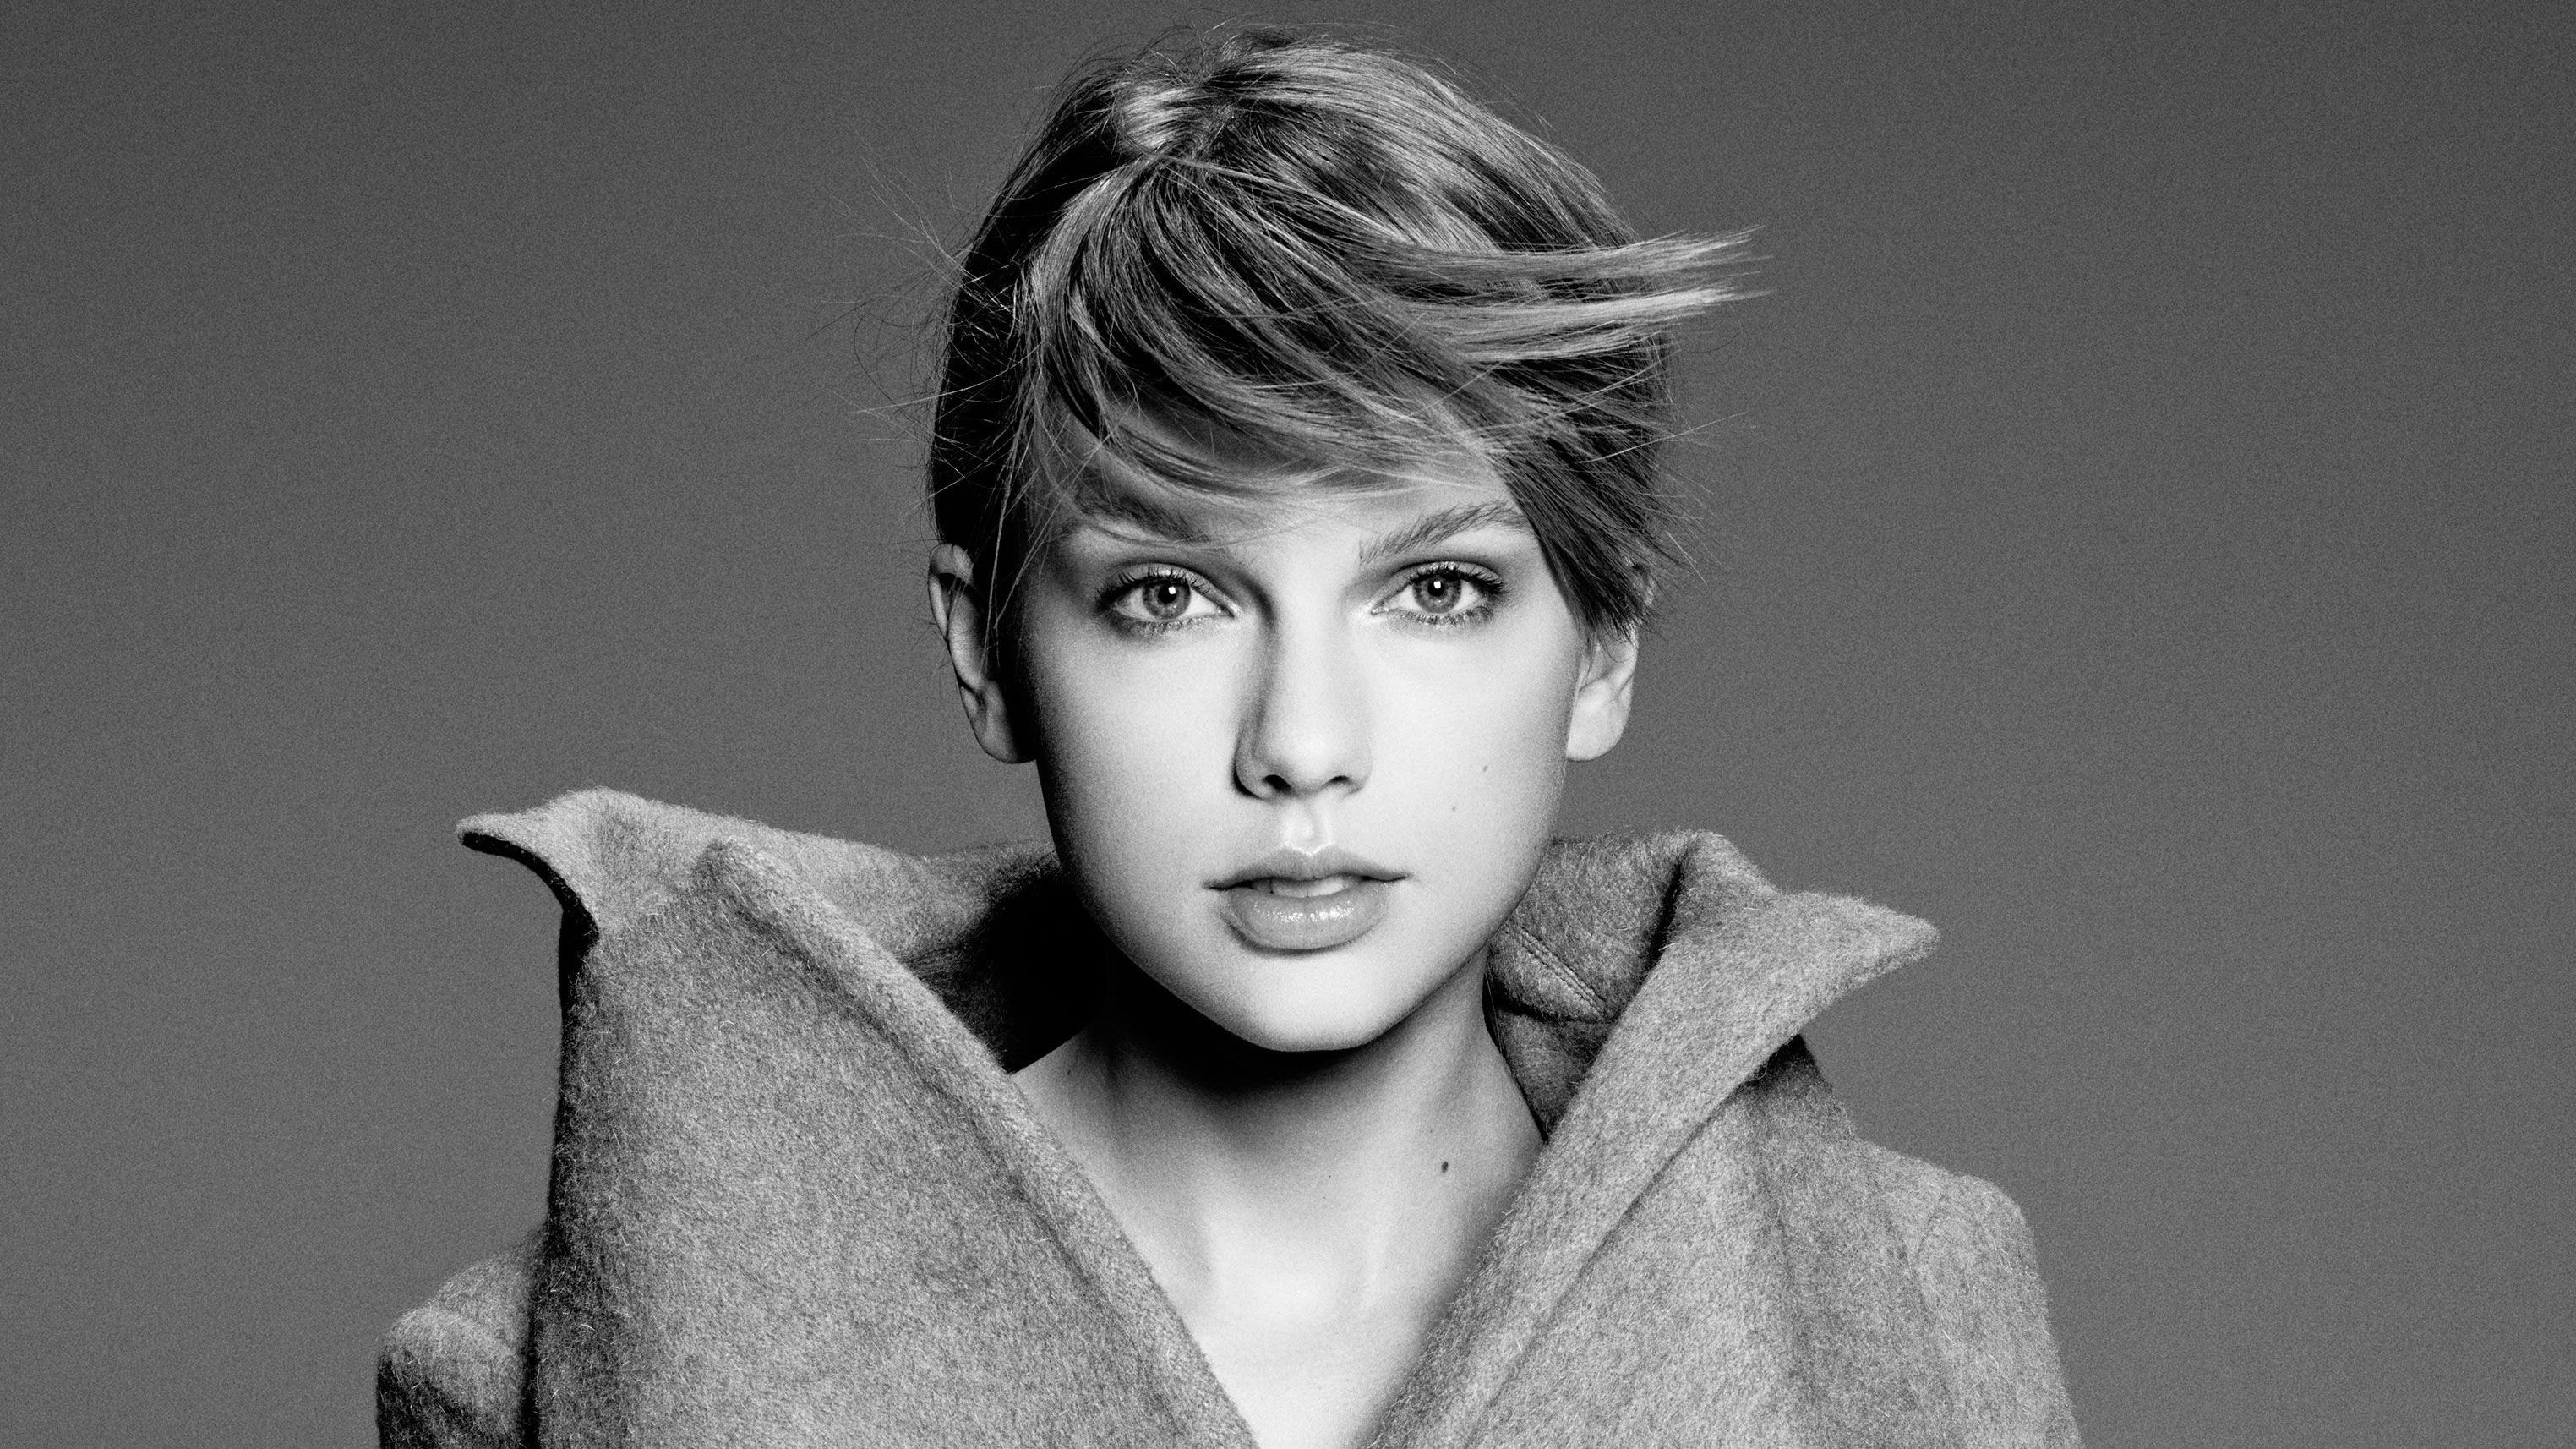 Taylor Swift Monochrome 4k 2019 1680x1050 Resolution HD 4k Wallpaper, Image, Background, Photo and Picture